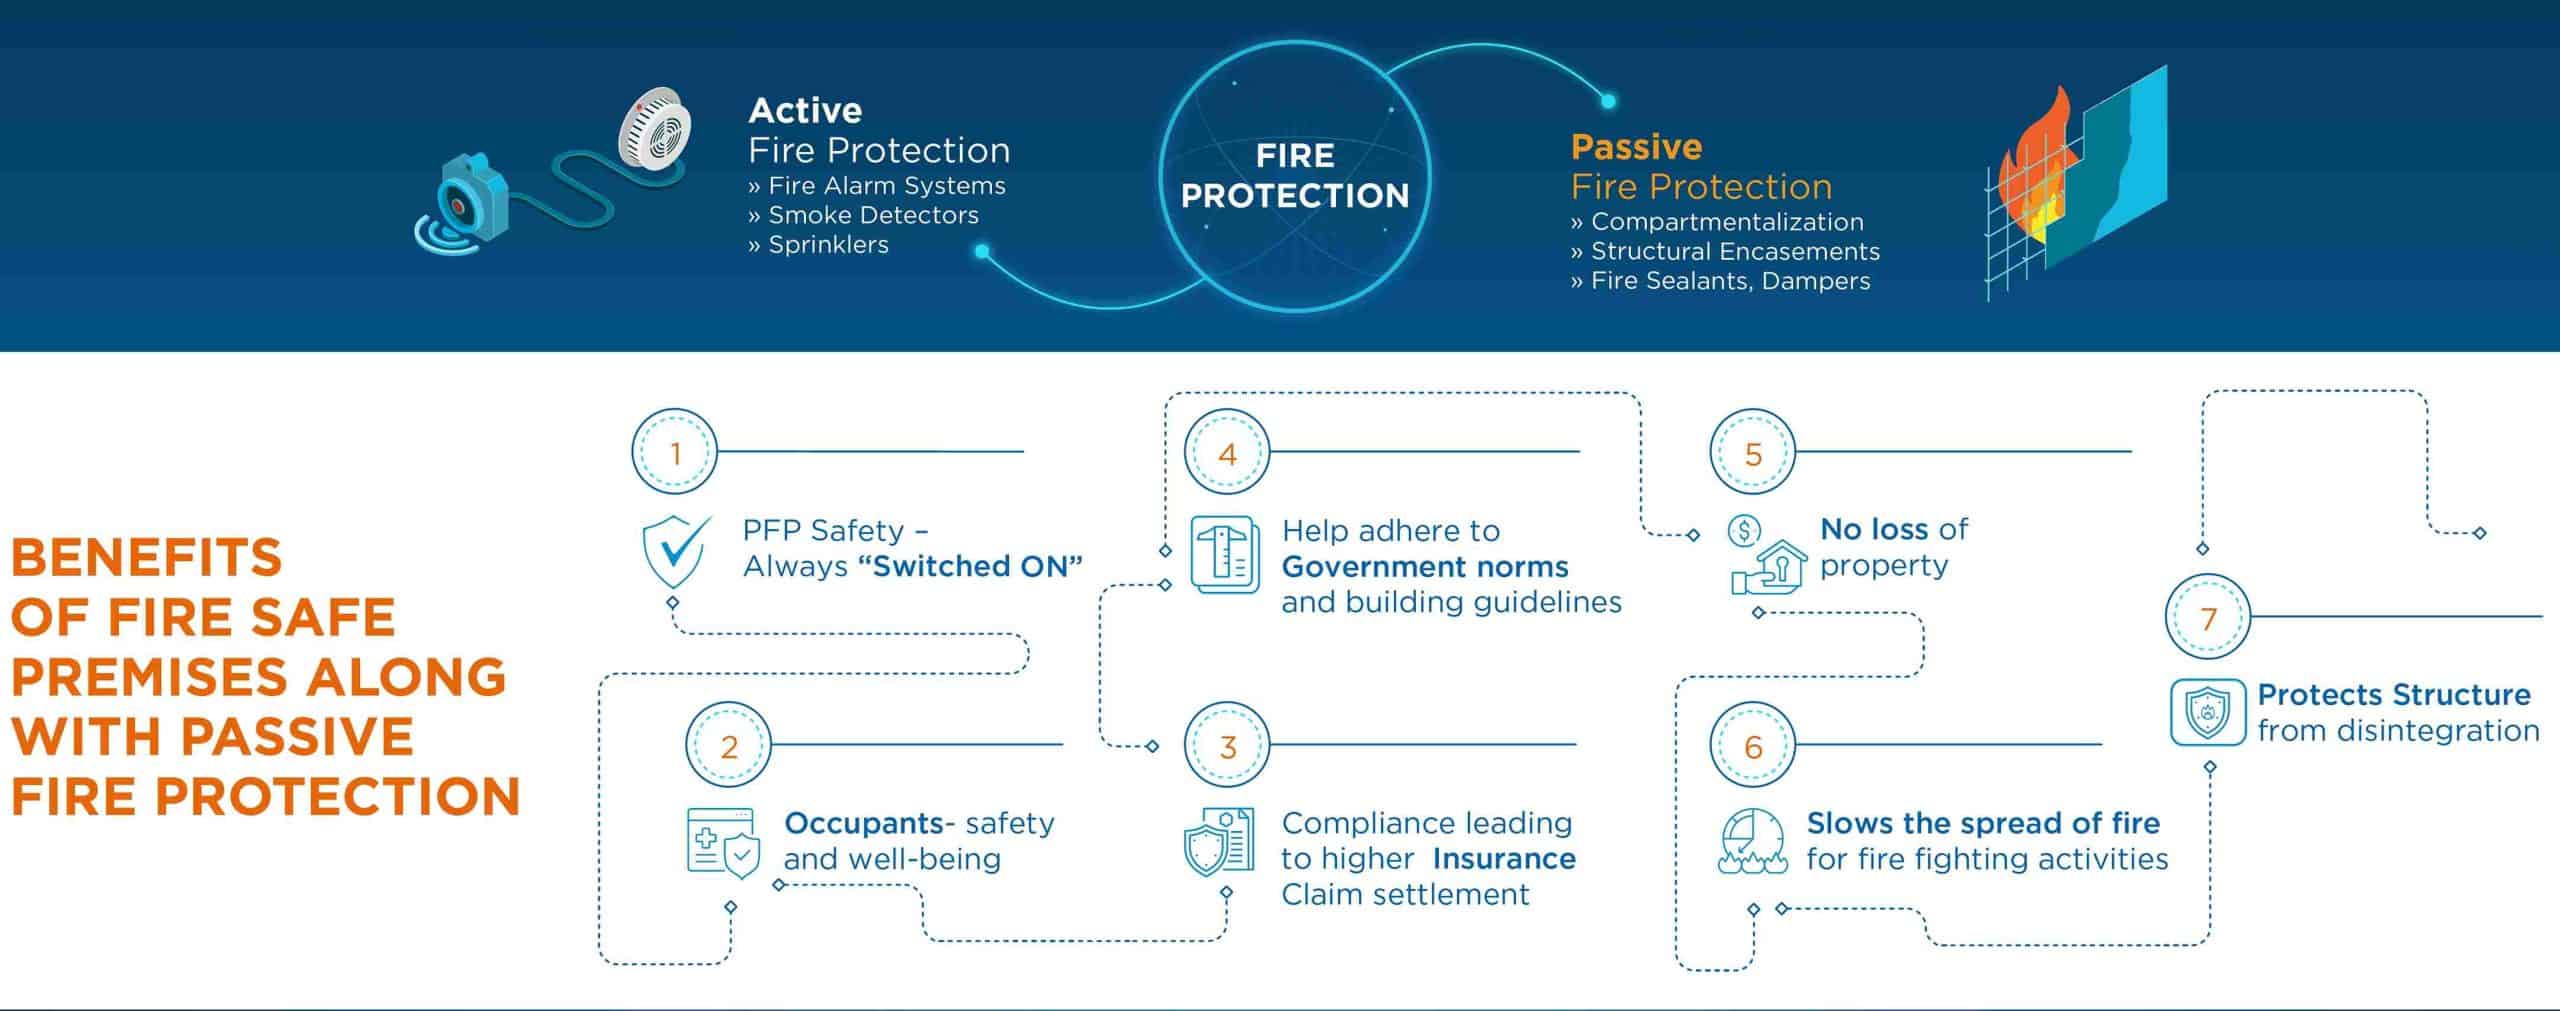 benefits of fire-safe premises along with passive fire protection